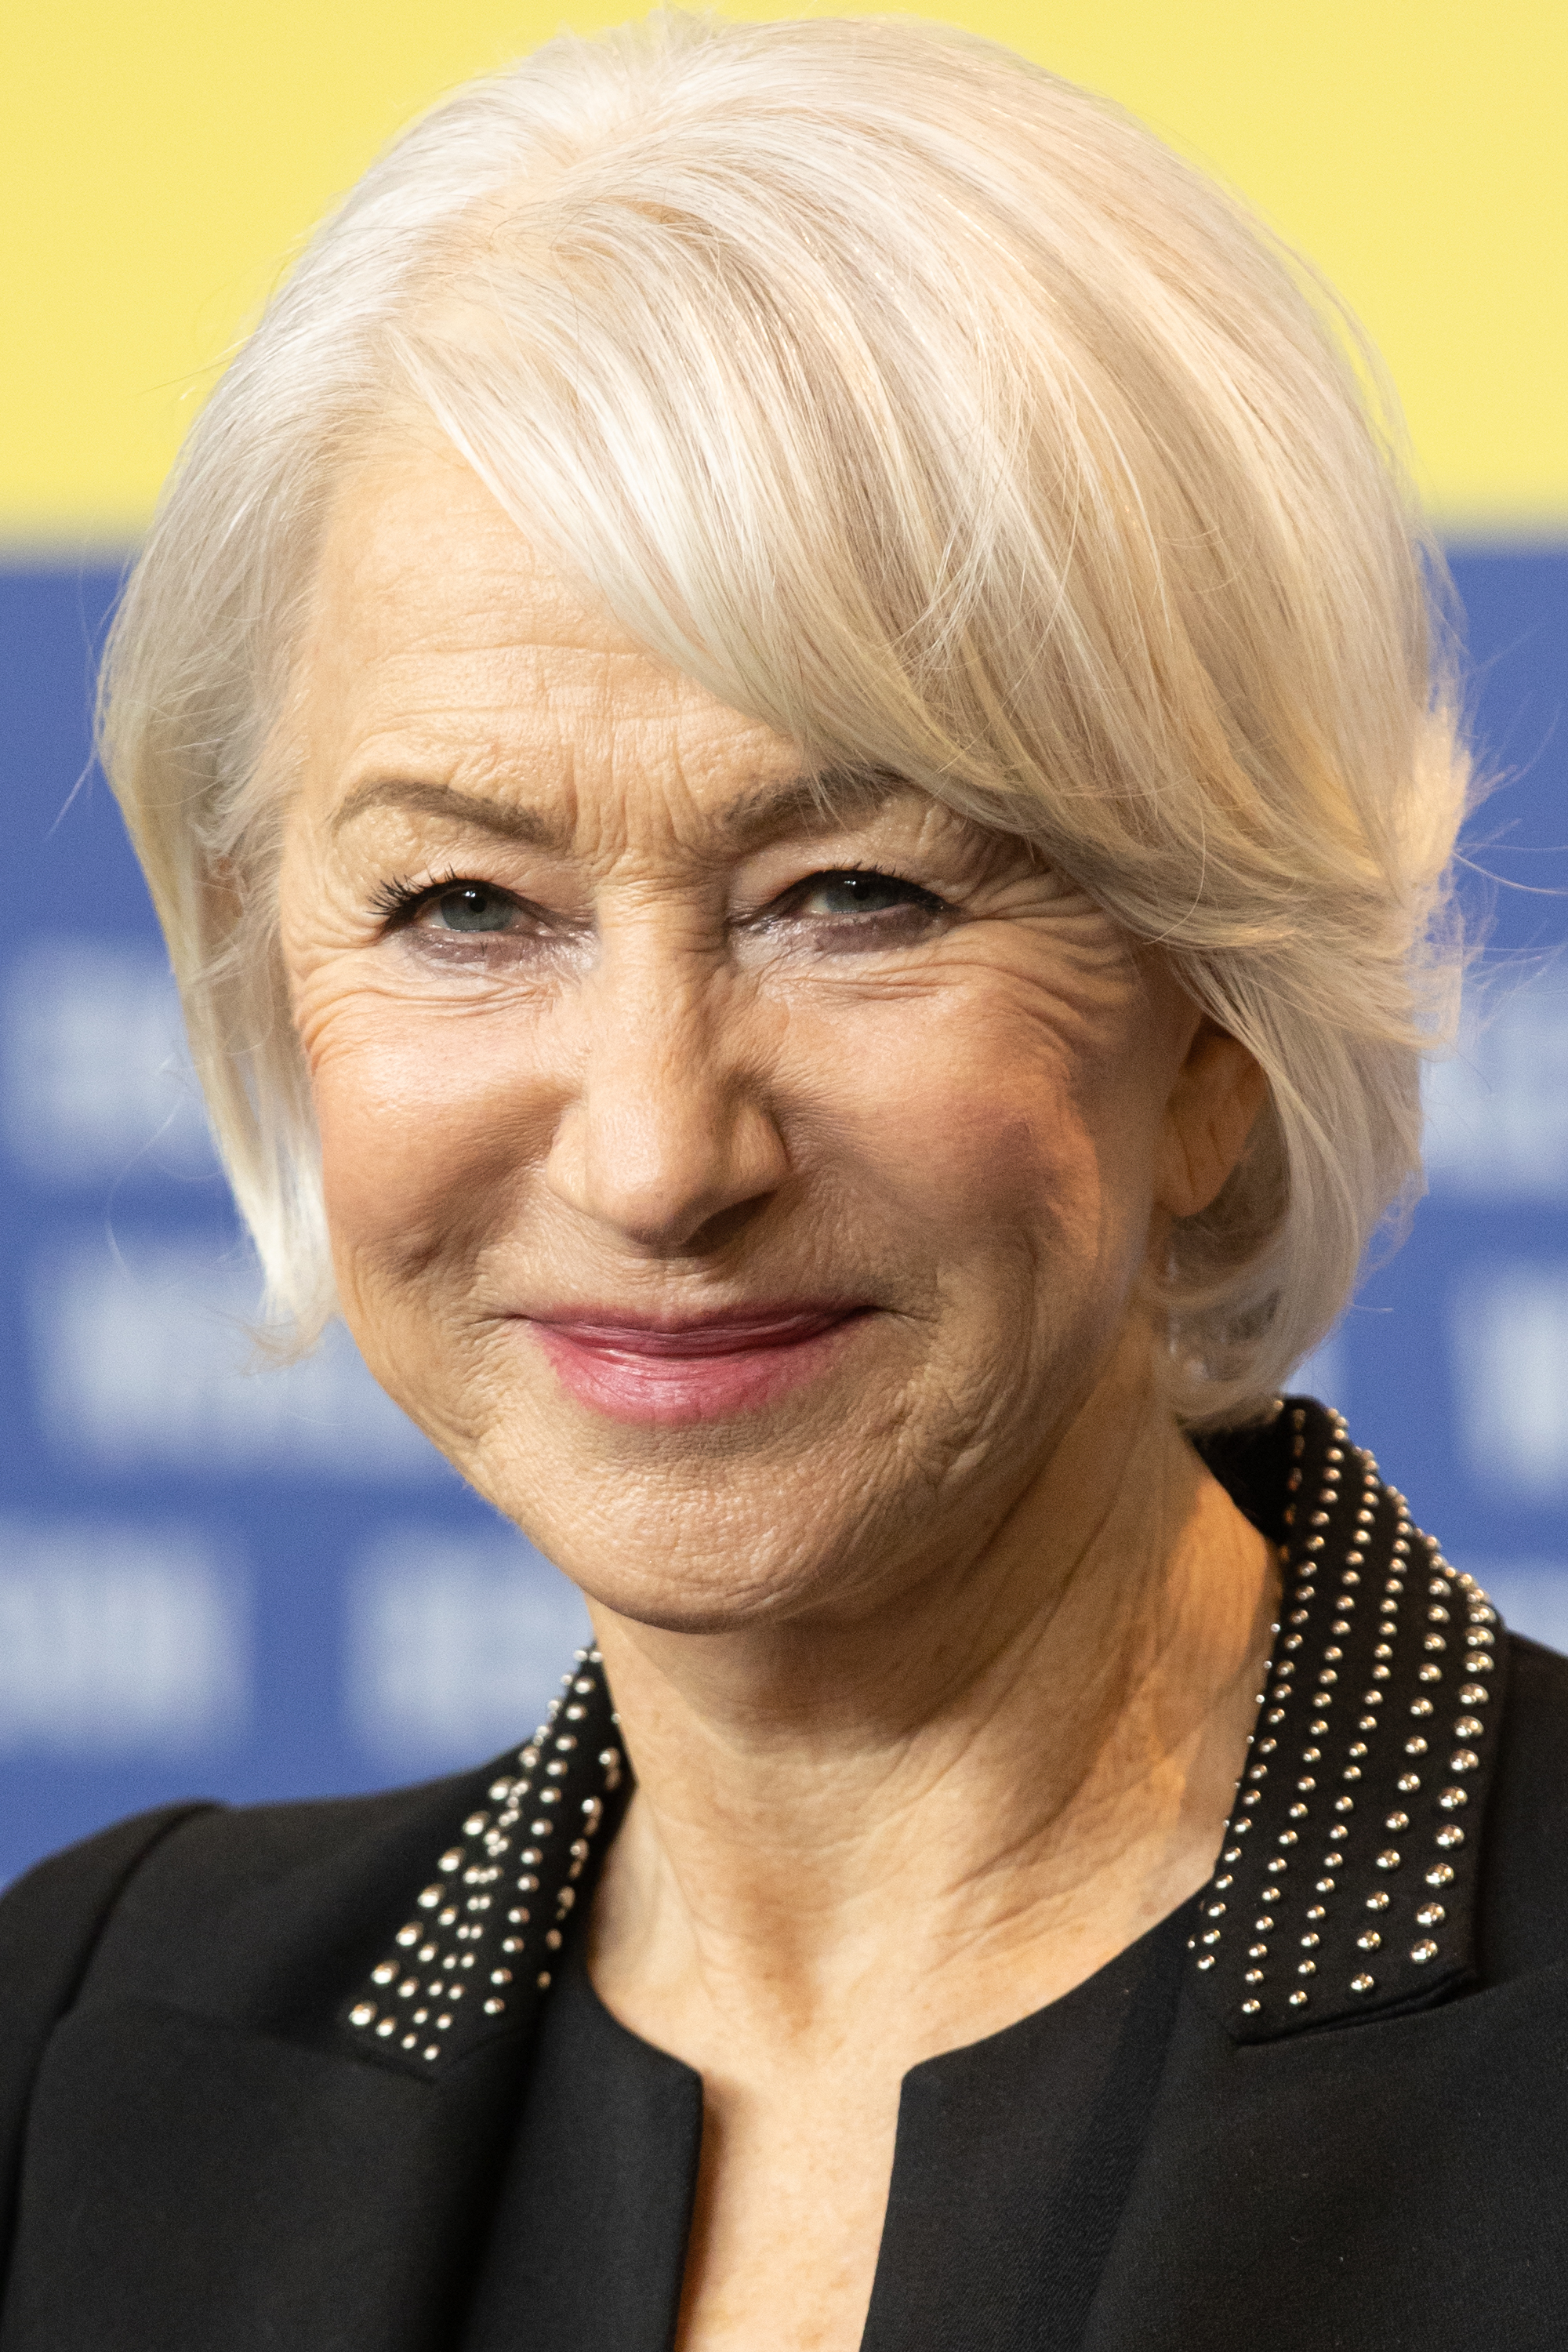 Helen Mirren on screen and stage - Wikipedia